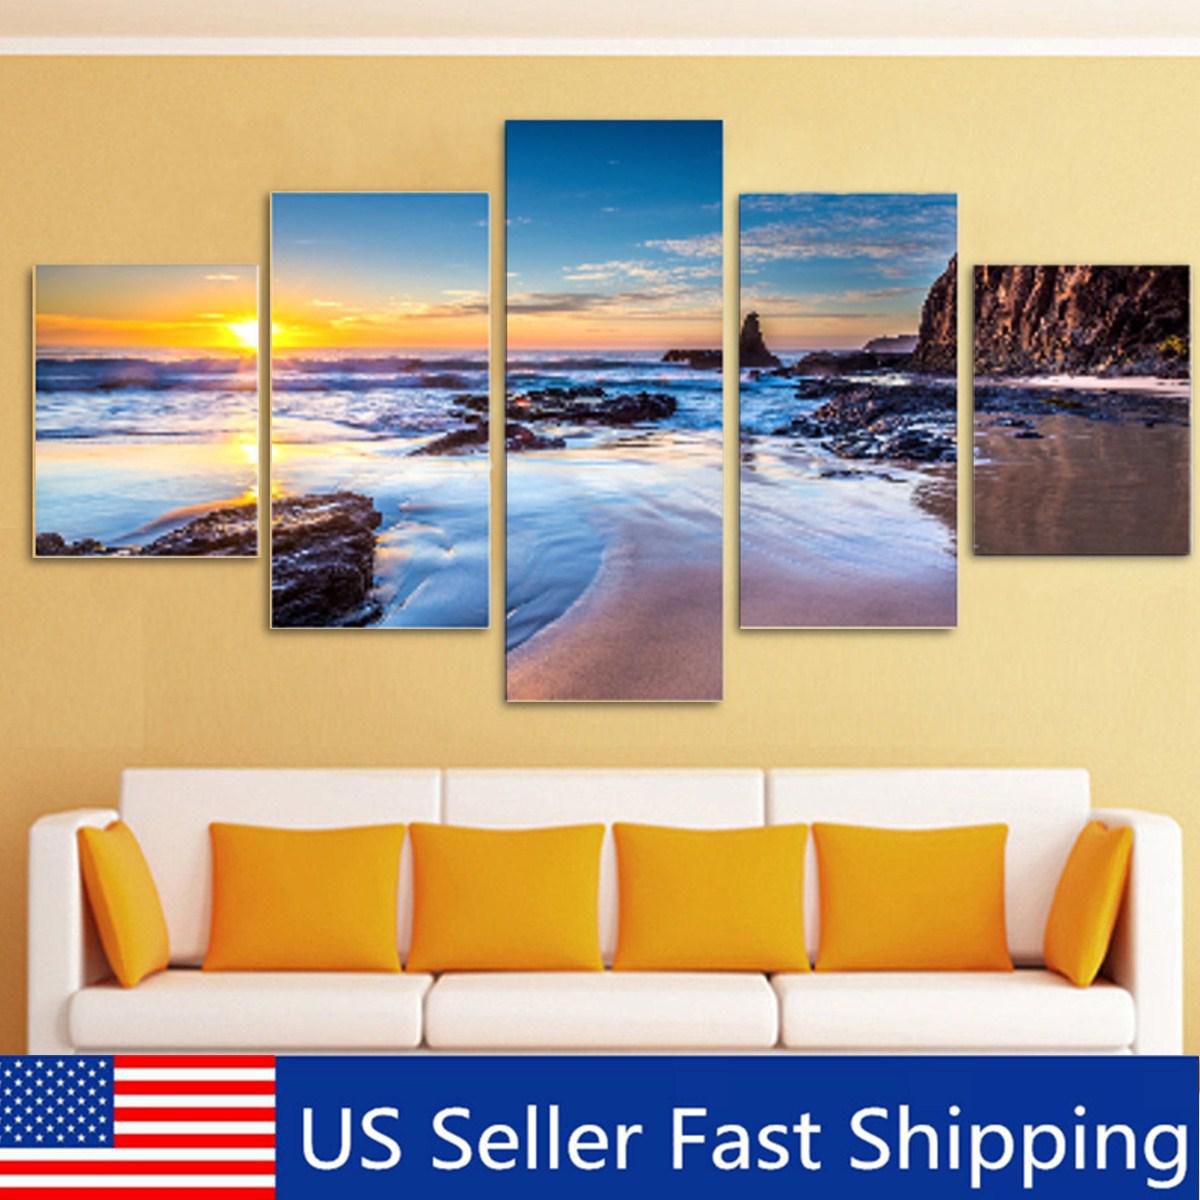 5pcs Unframed Modern Art Oil Painting Print Canvas Picture Home Wall Room Decor